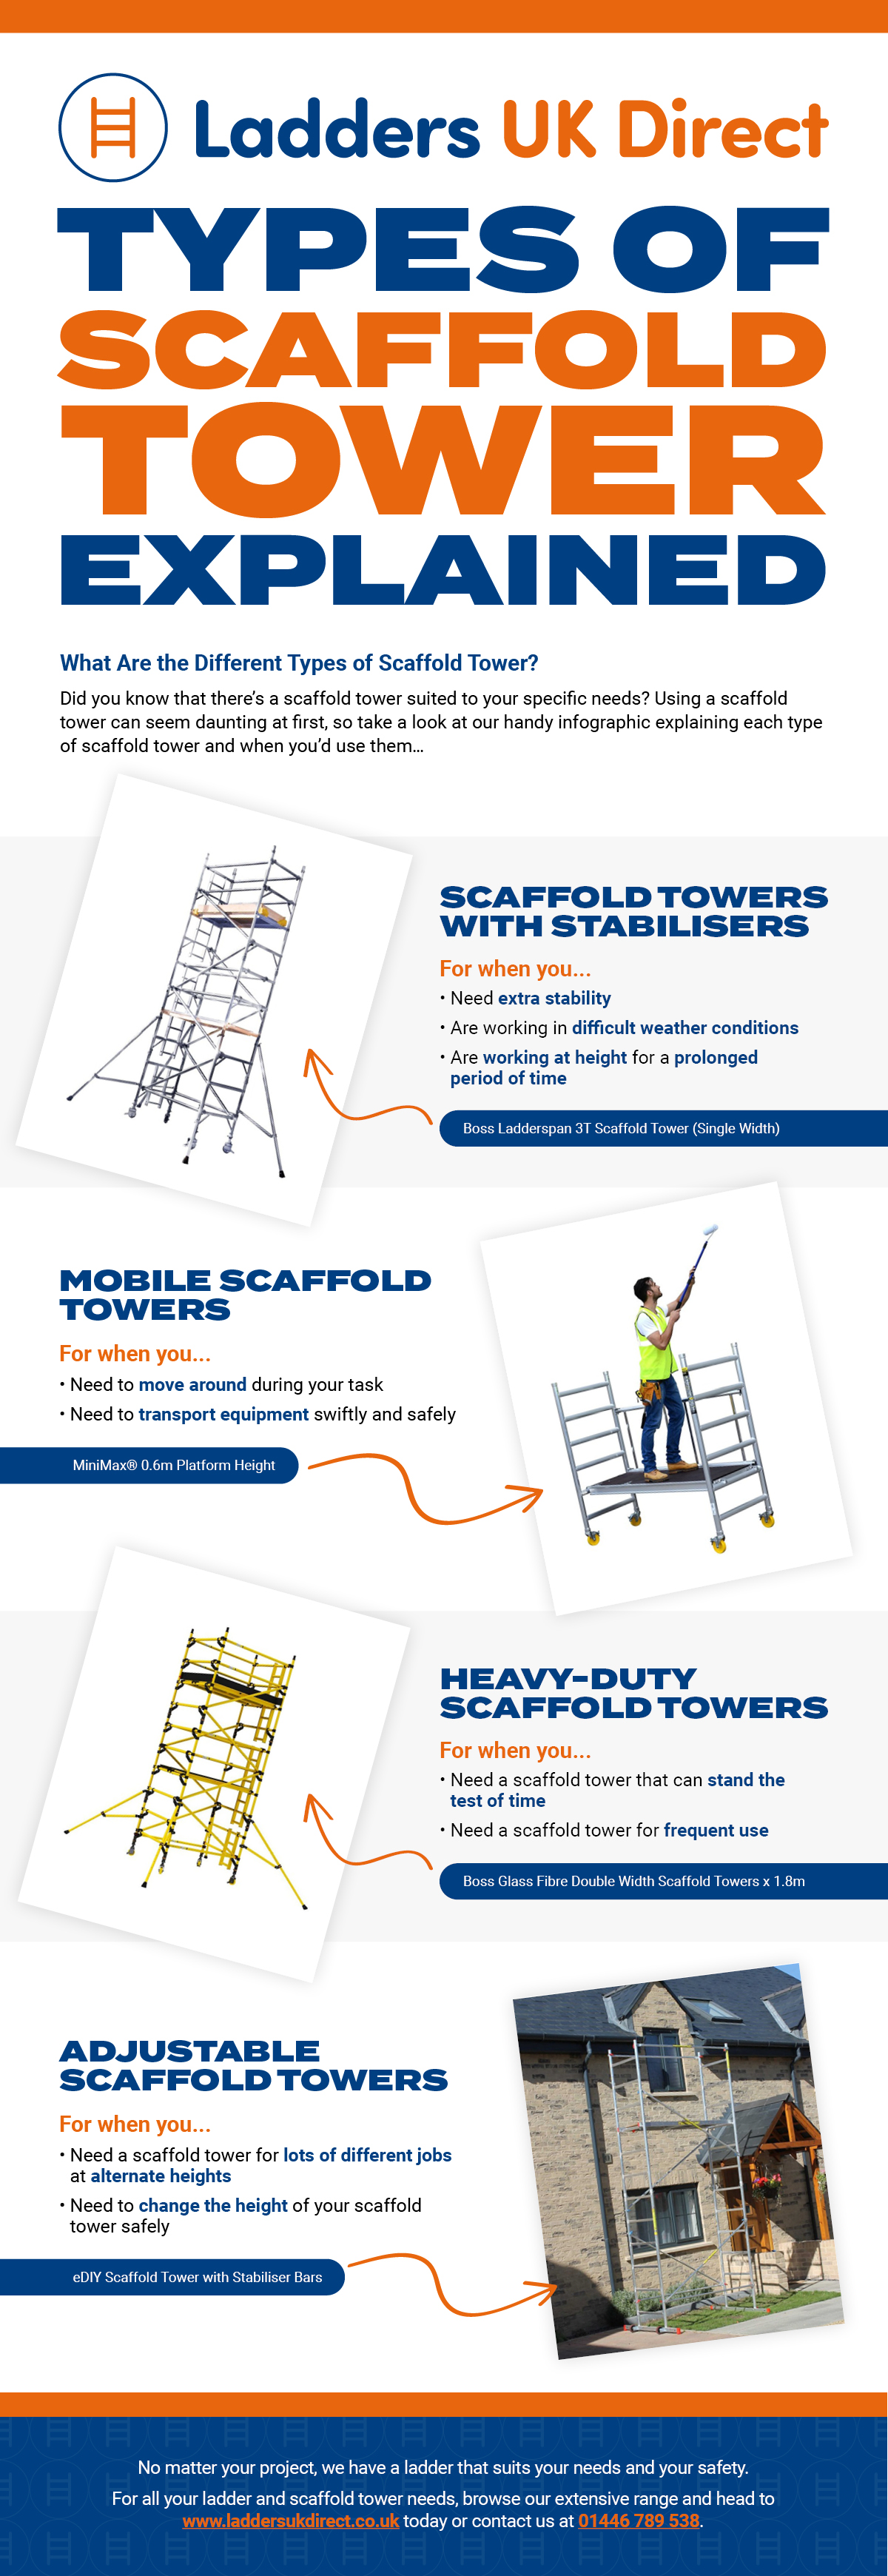 types of scaffold tower explained